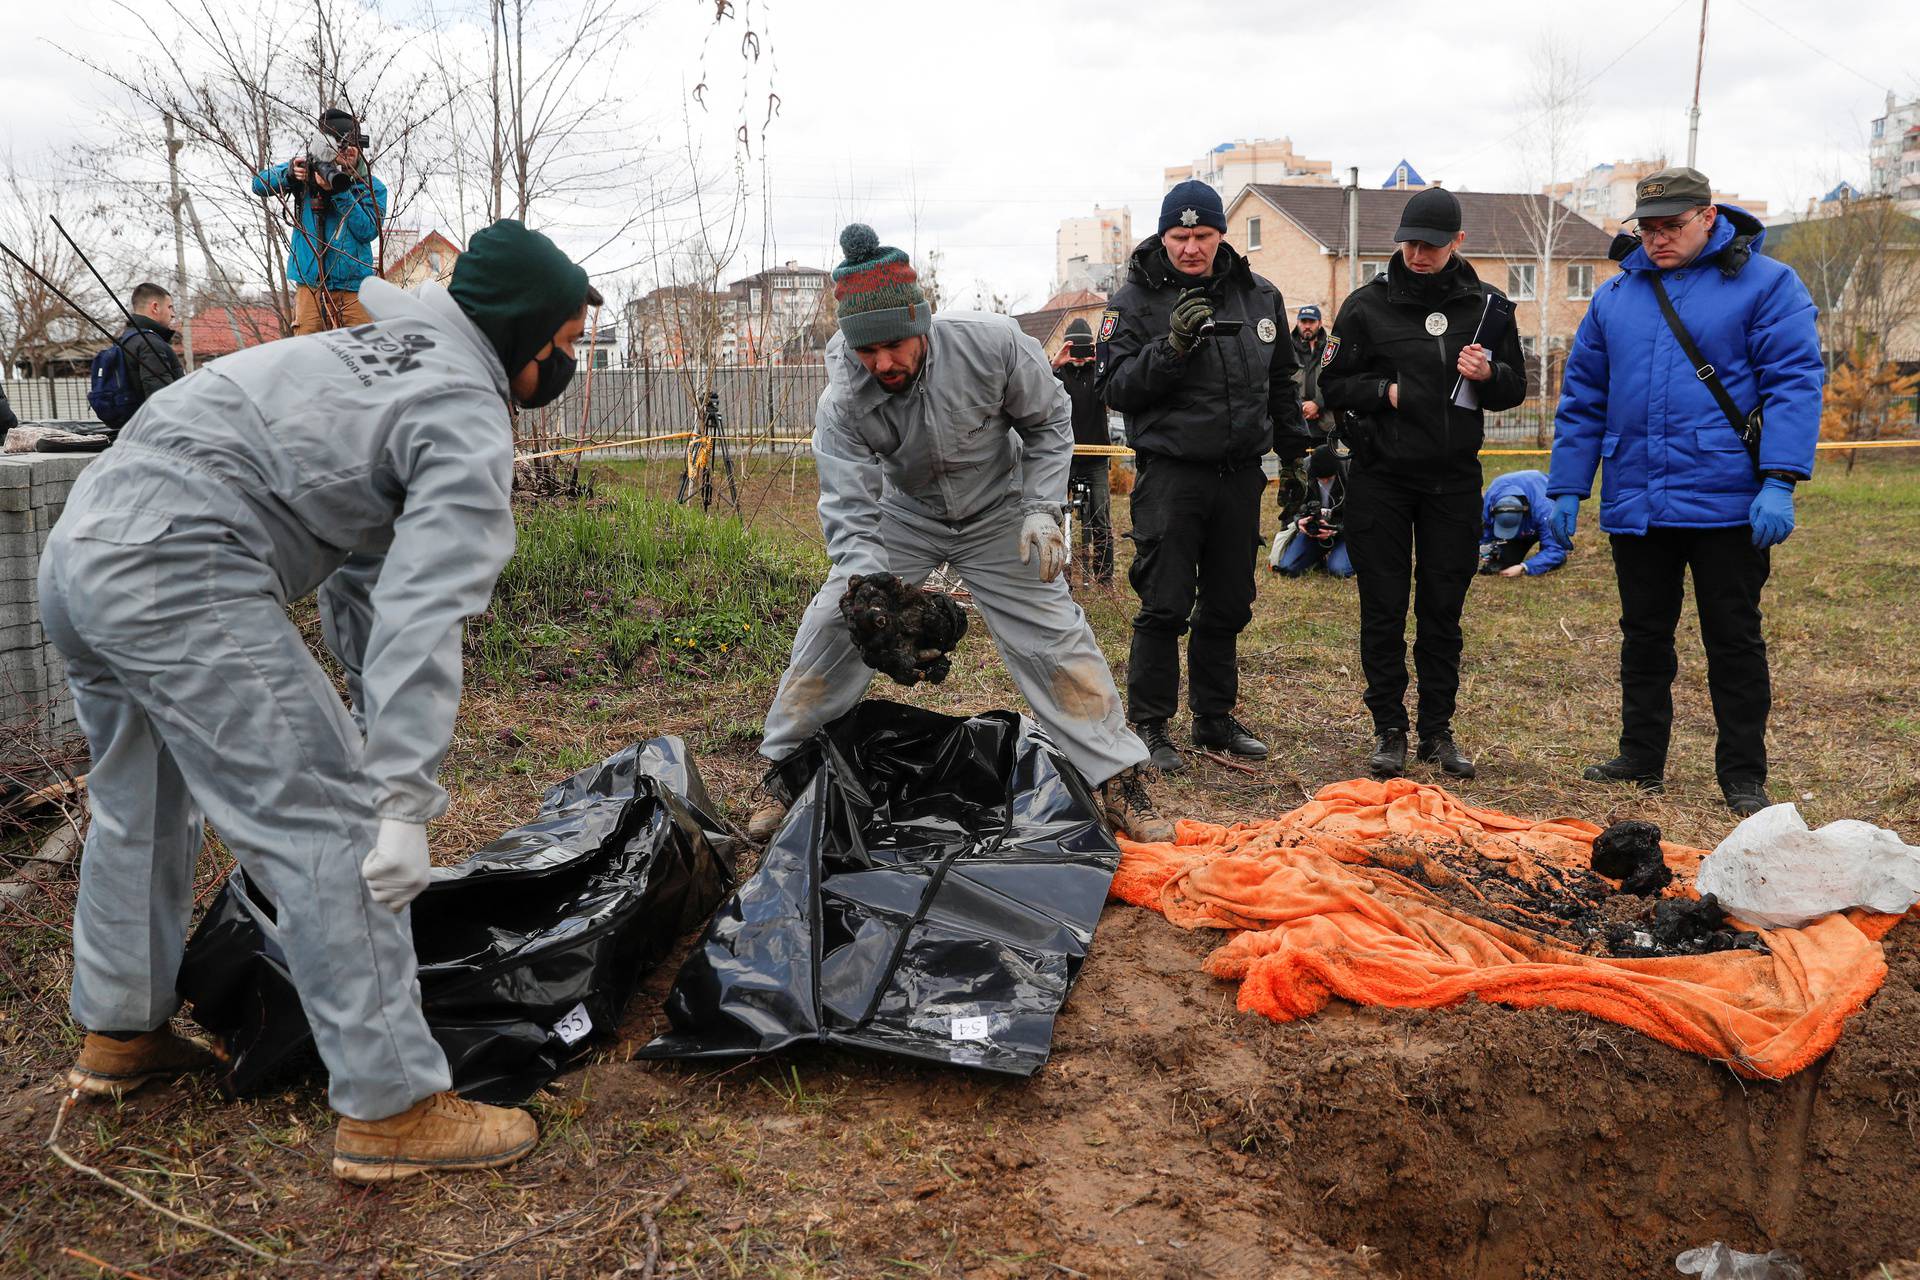 Ukrainian forensics investigators place remains of burned civilians exhumed from a grave in body bags, in the town of Bucha